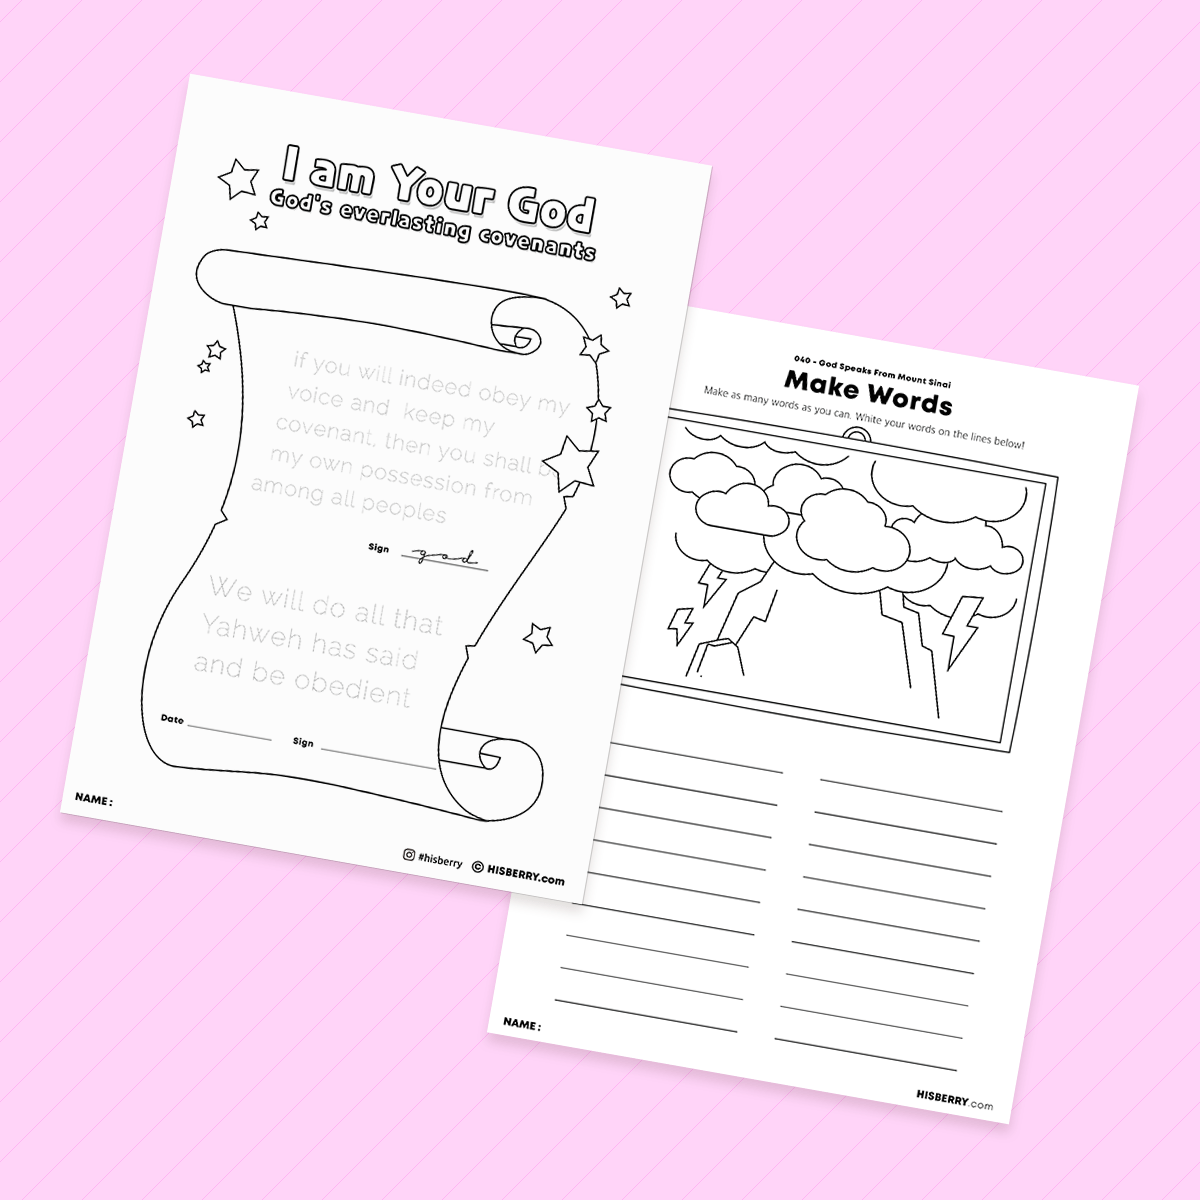 God Speaks From Mount Sinai - Bible Verse Activity Worksheets